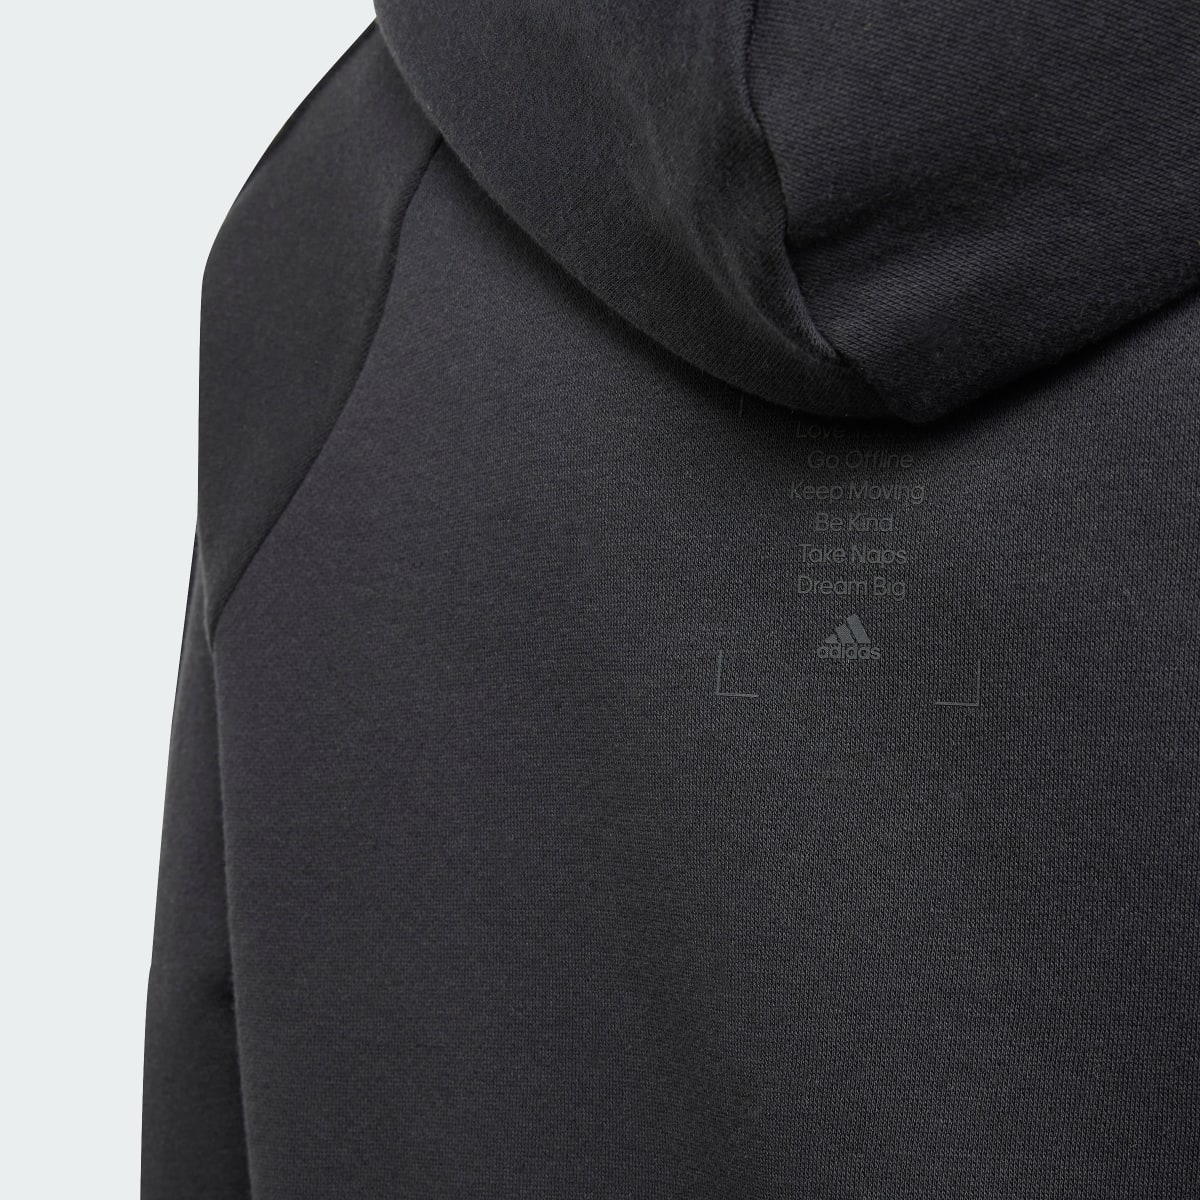 Adidas The Safe Place Hoodie. 5